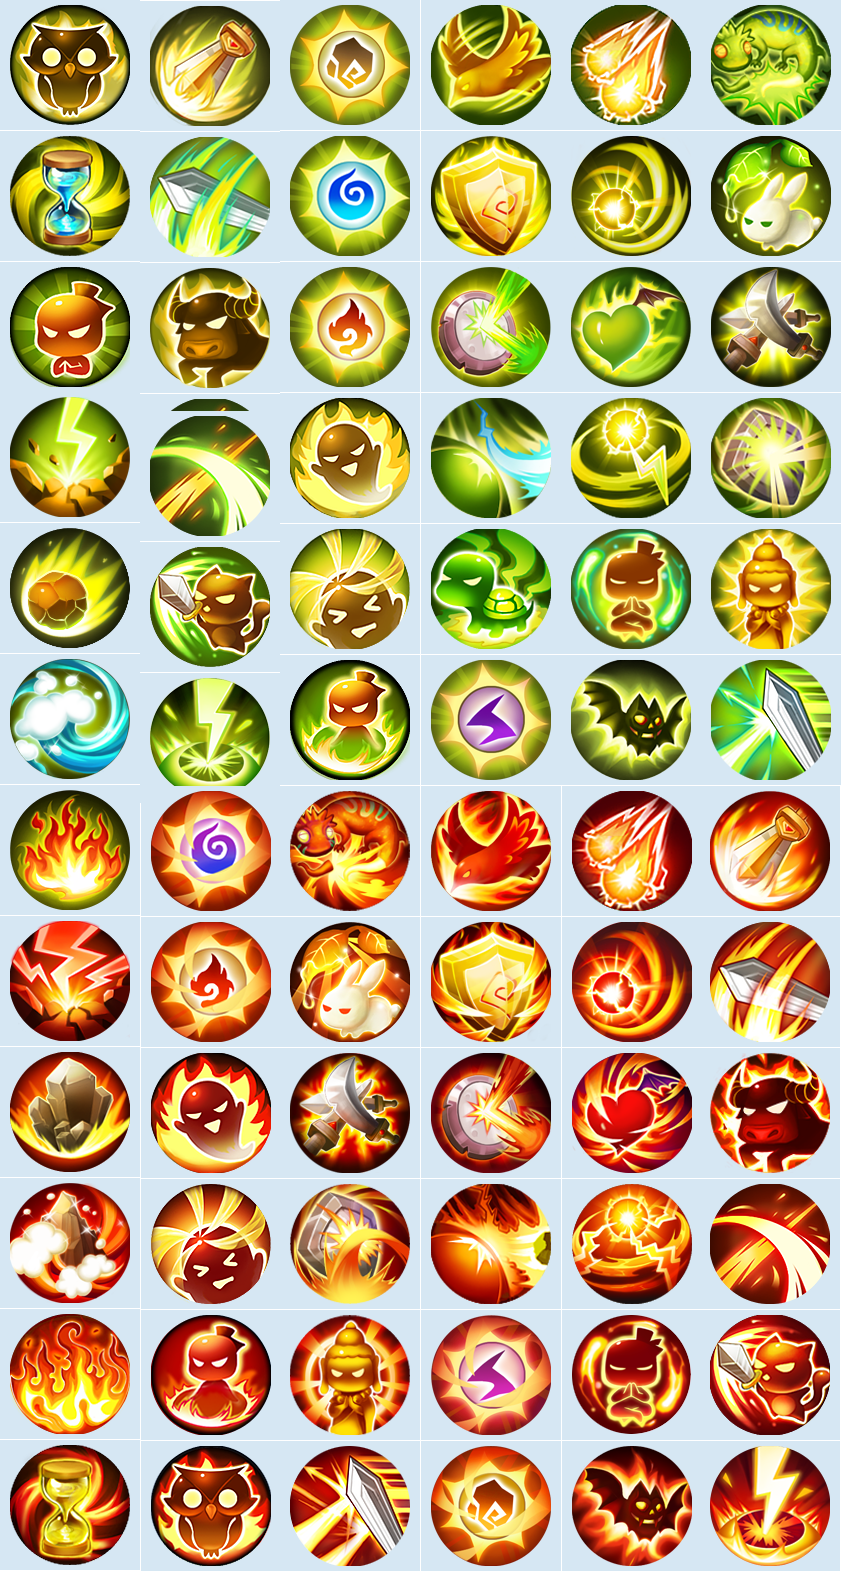 Fantasy Game Button Maker on Behance | Game UI Design | Icon Library 